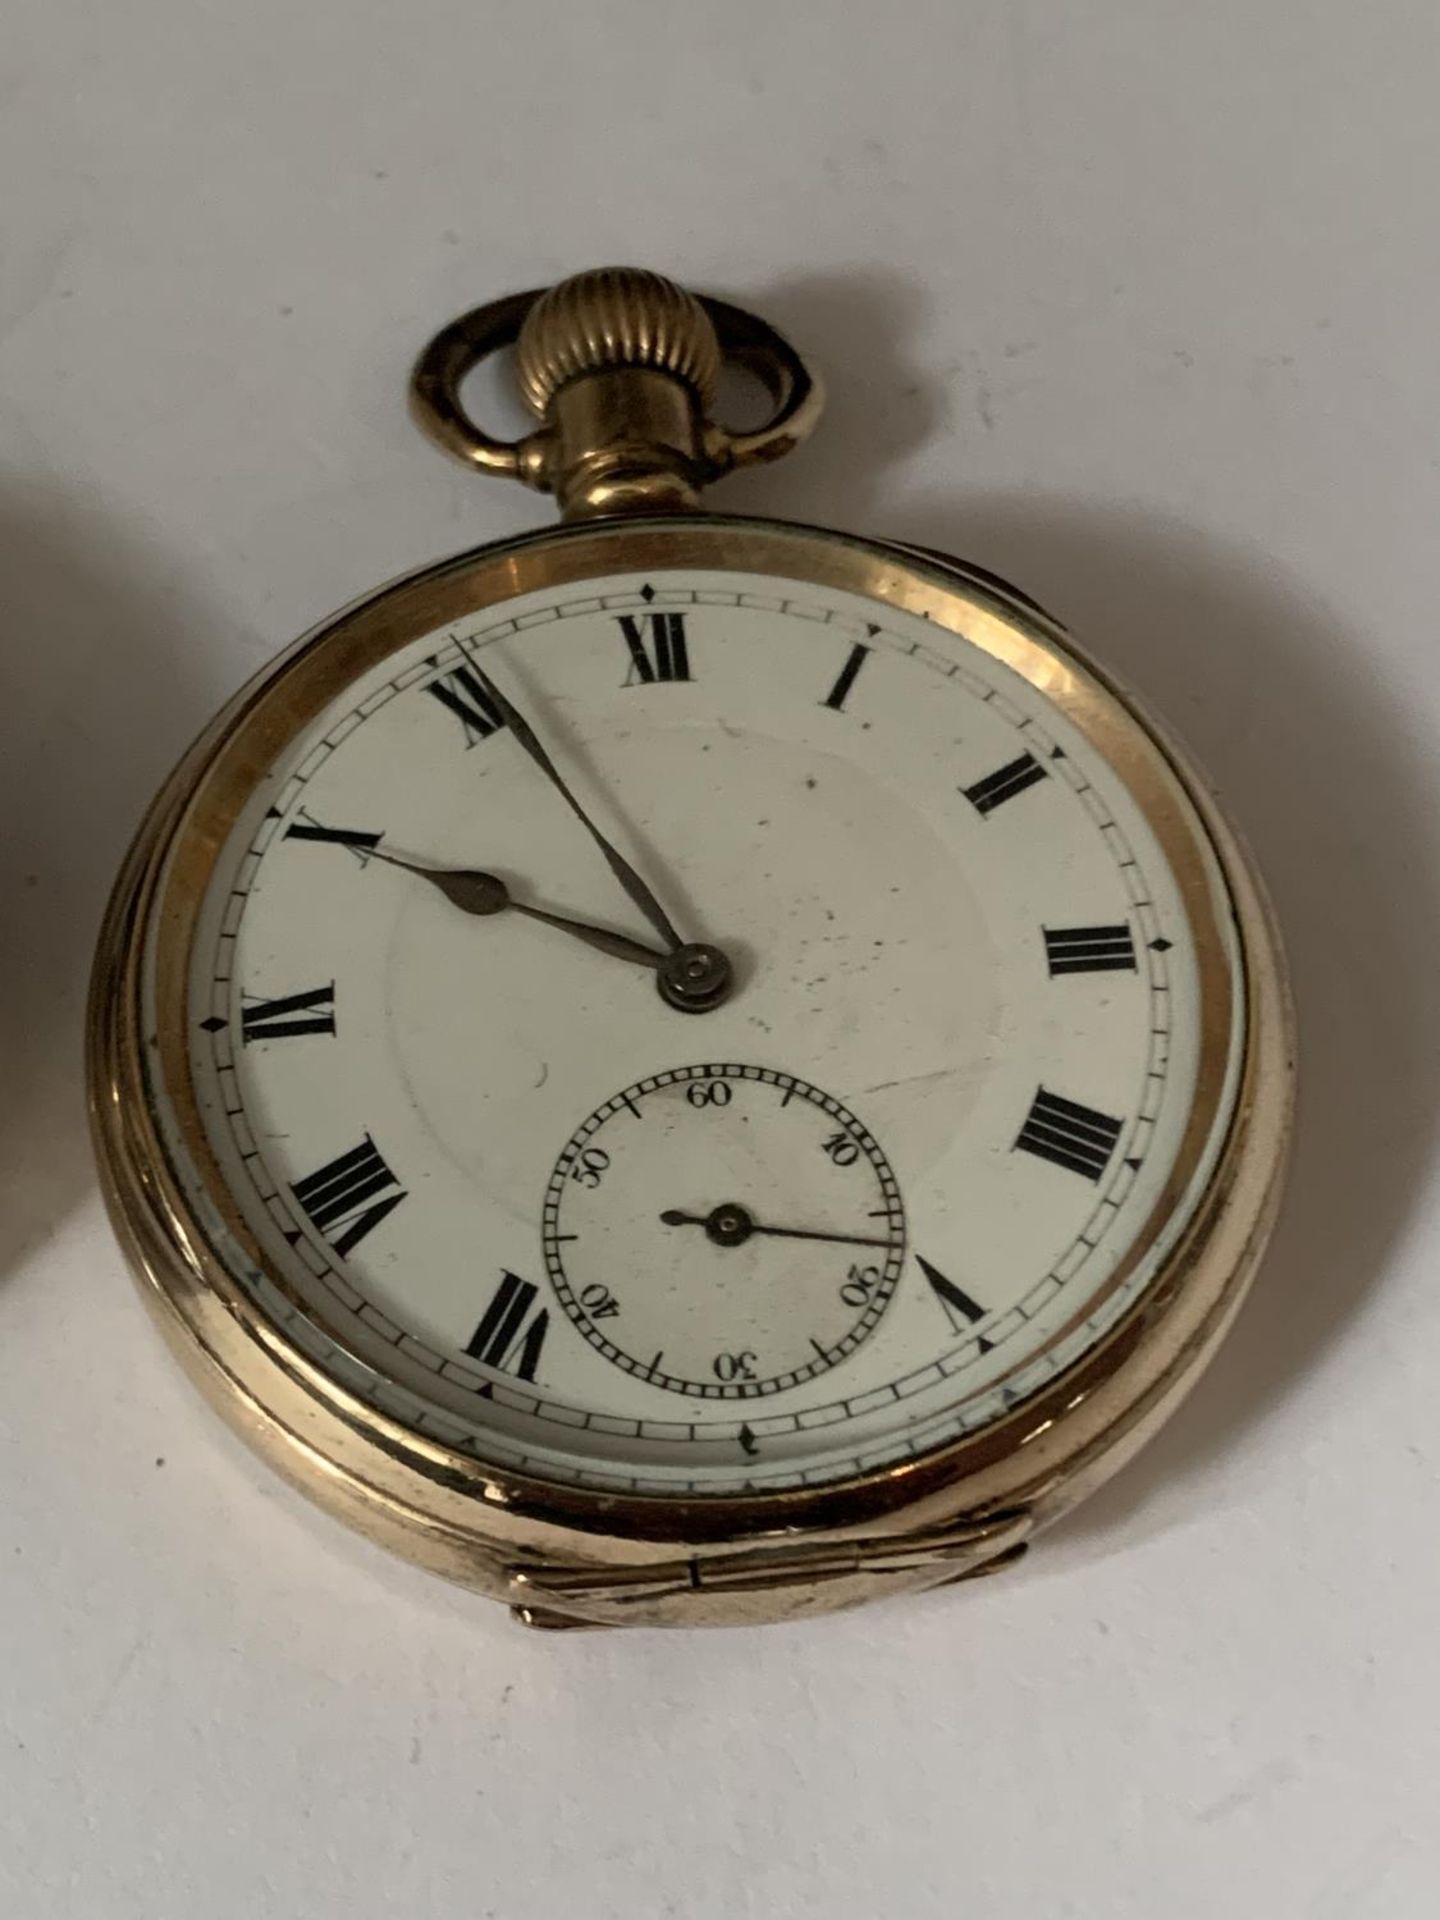 TWO POCKET WATCHES ONE GOLD PLATED - Image 2 of 4